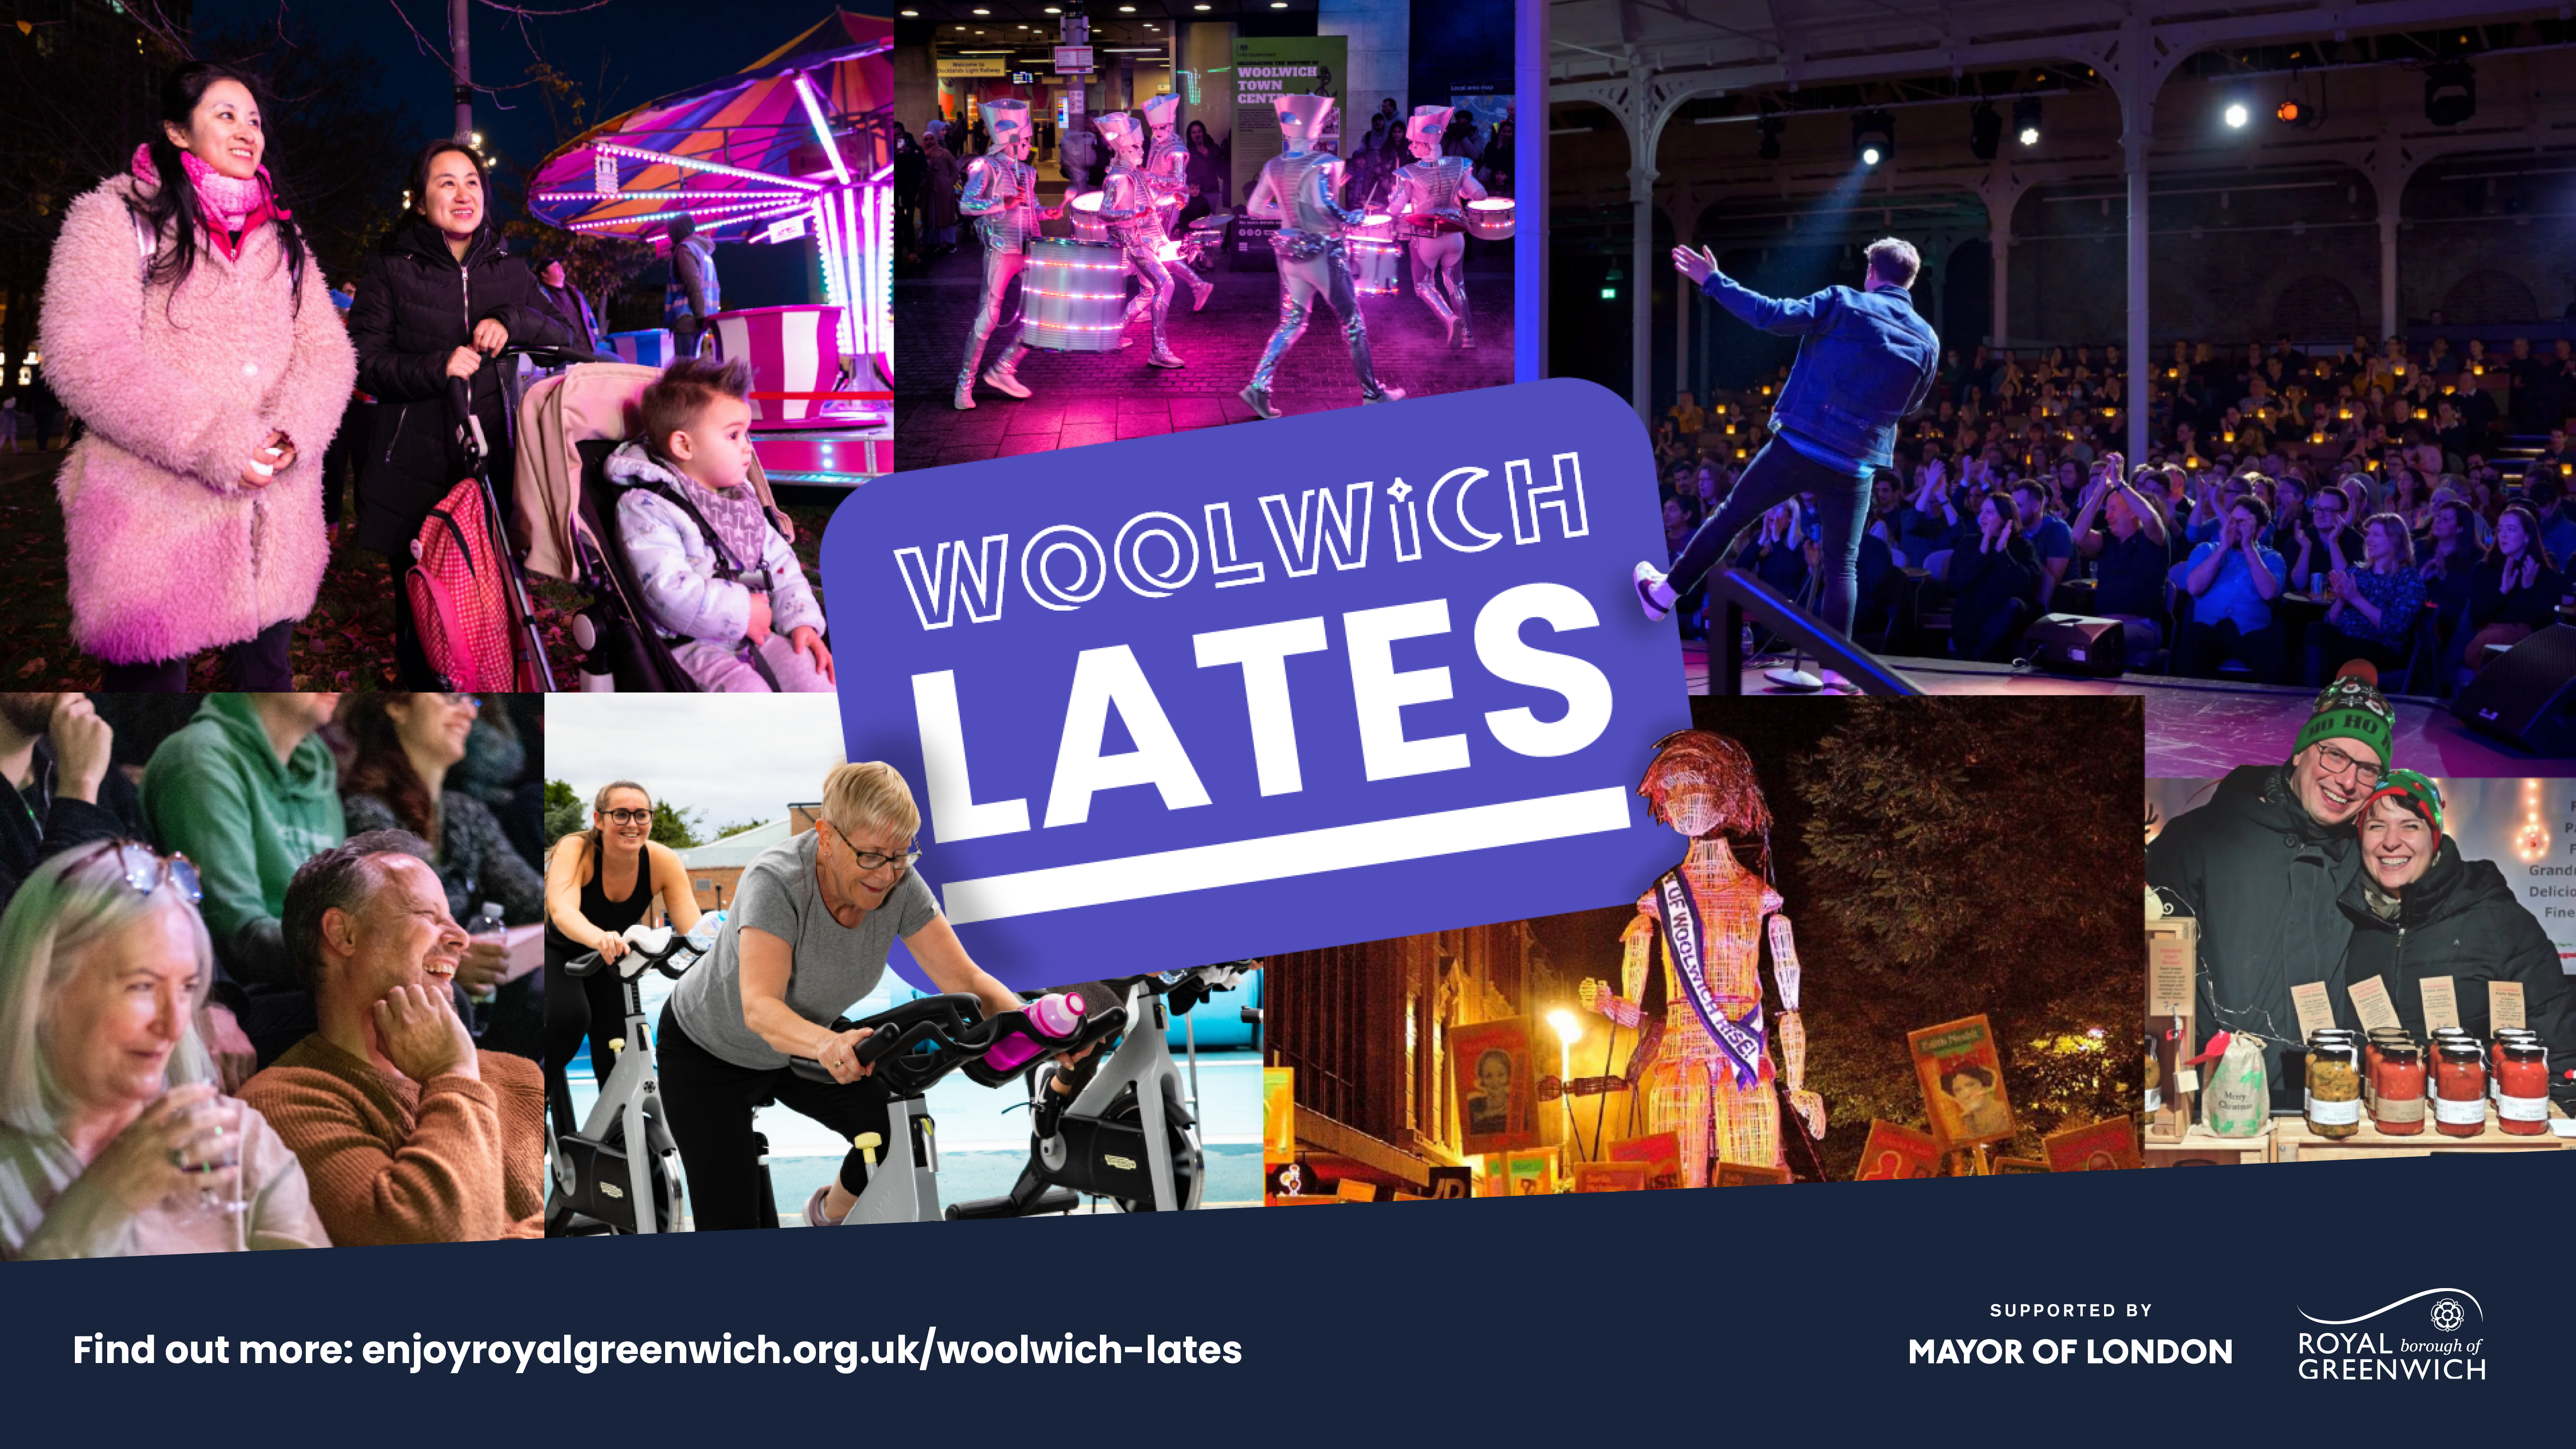 Woolwich Lates featuring different people doing different activities